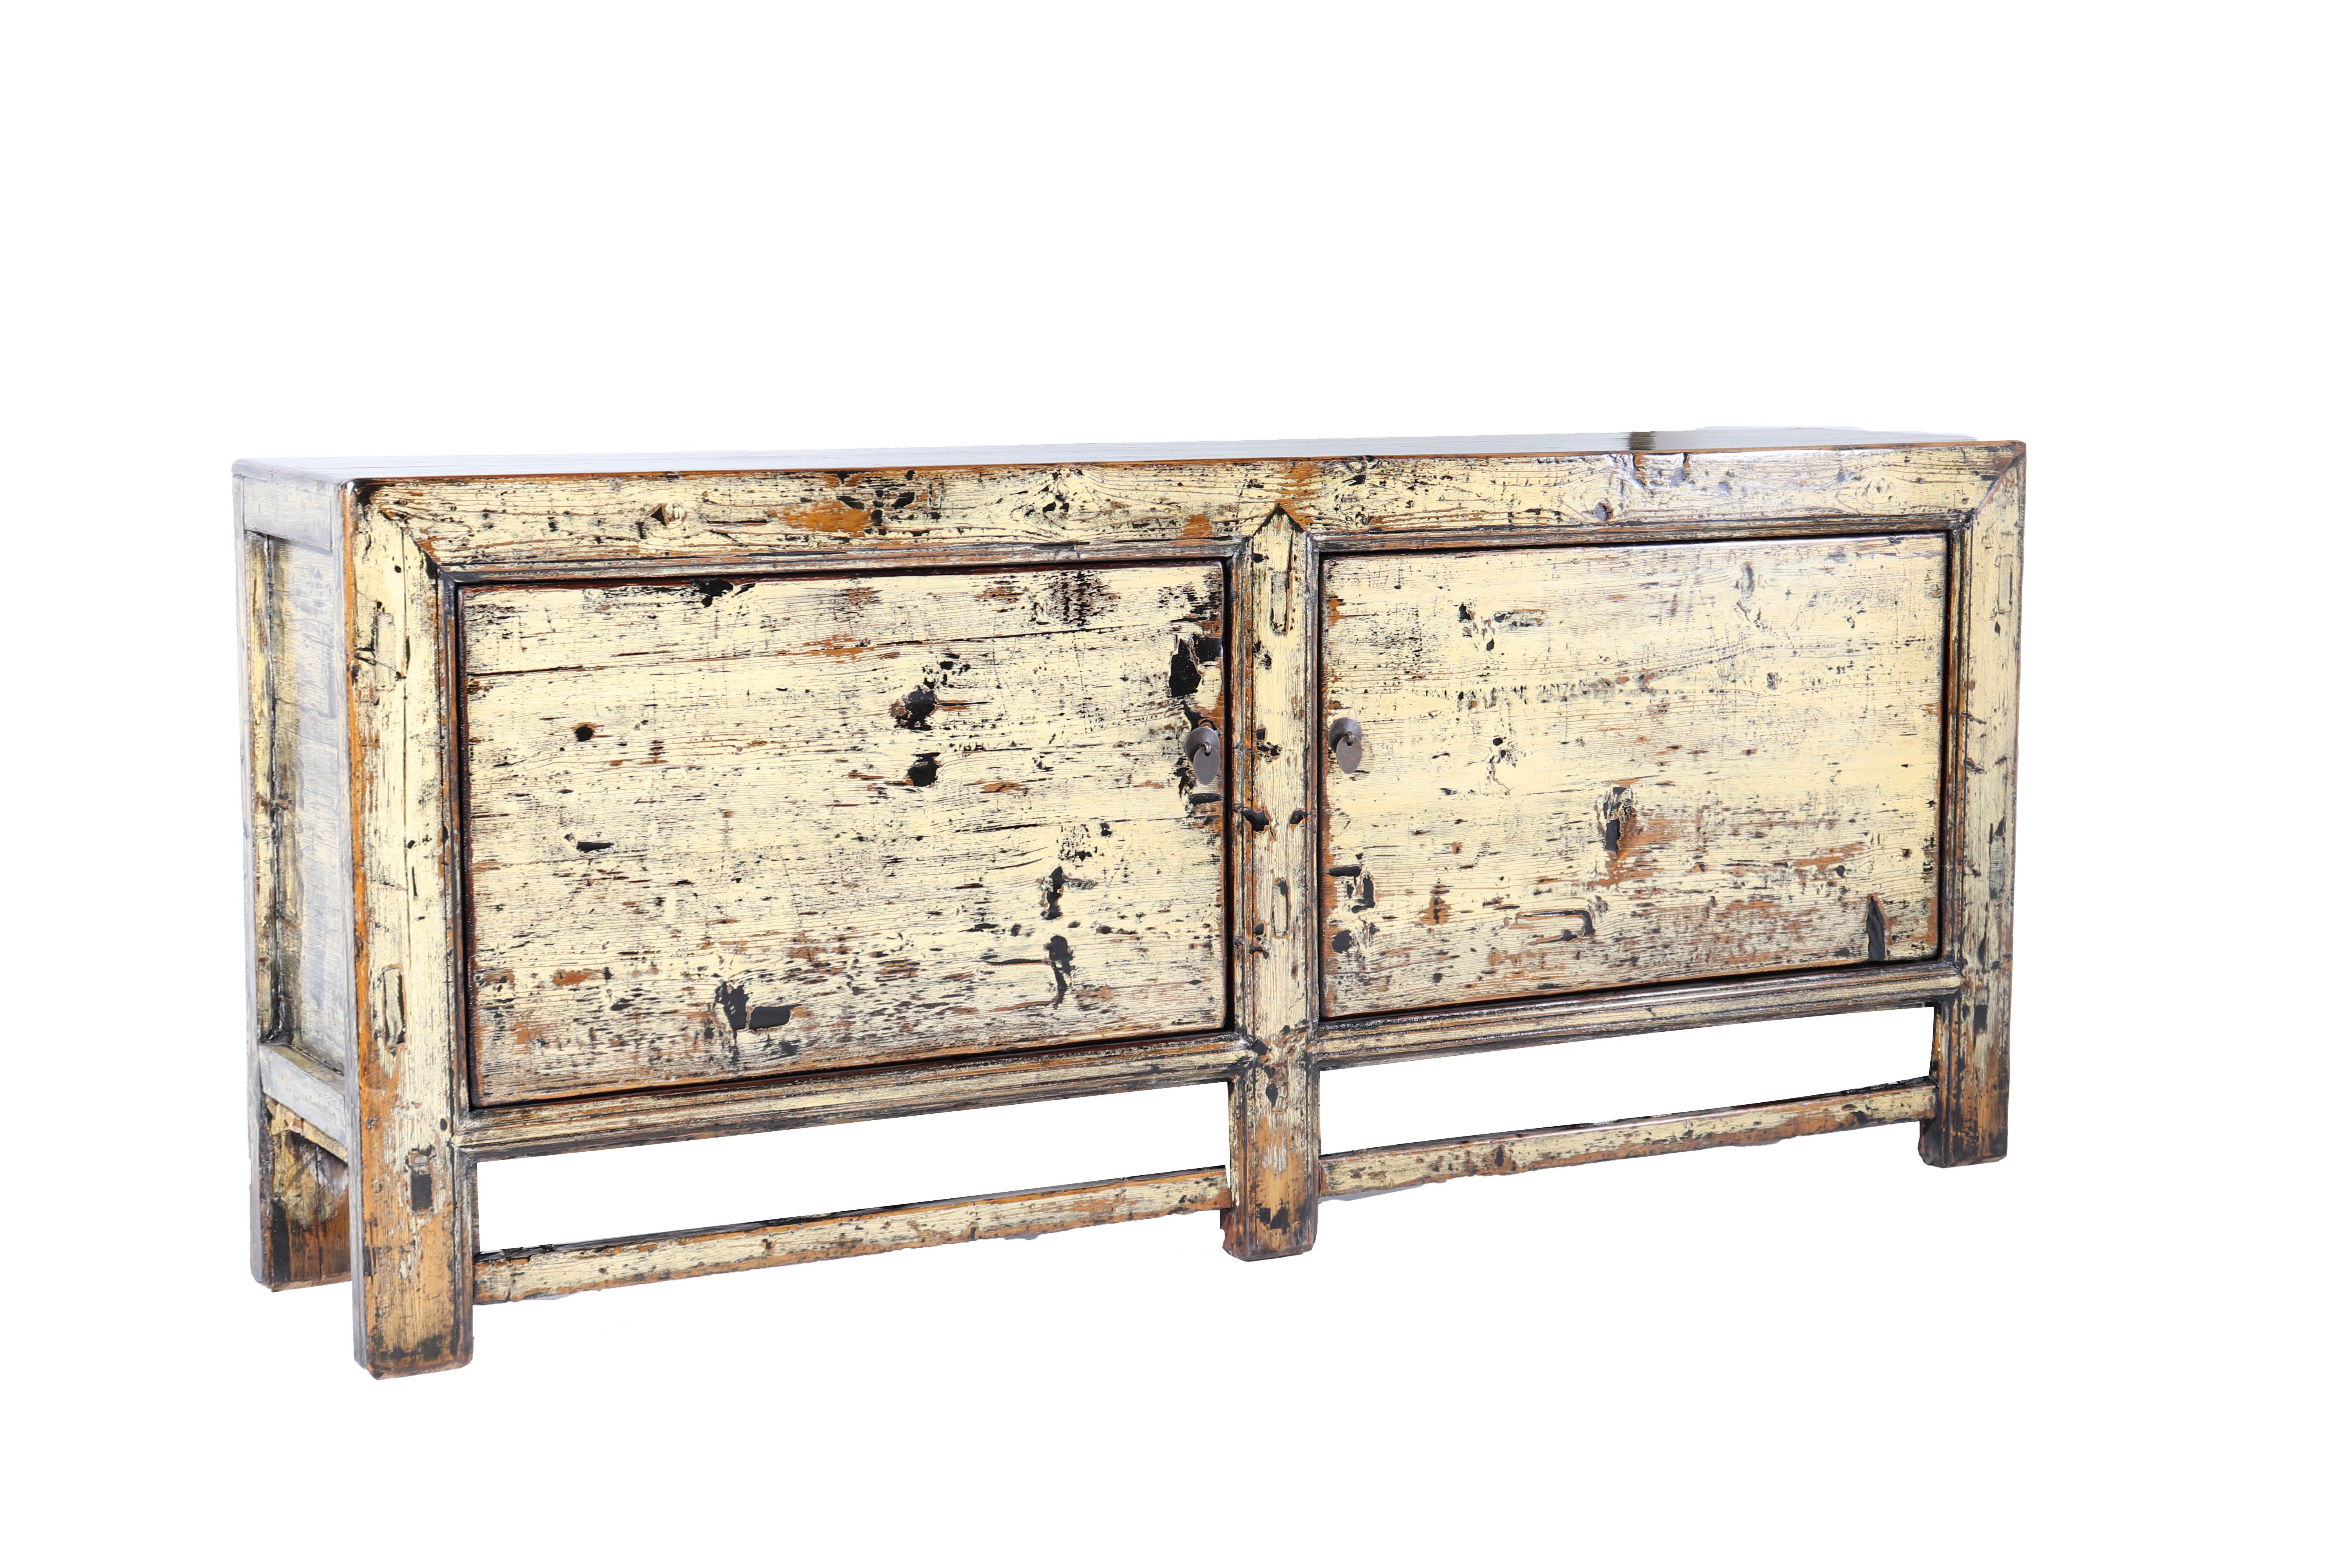 Organic Modern Vintage Two-Door Server in Original Paint Patina with Lacquer over Glaze